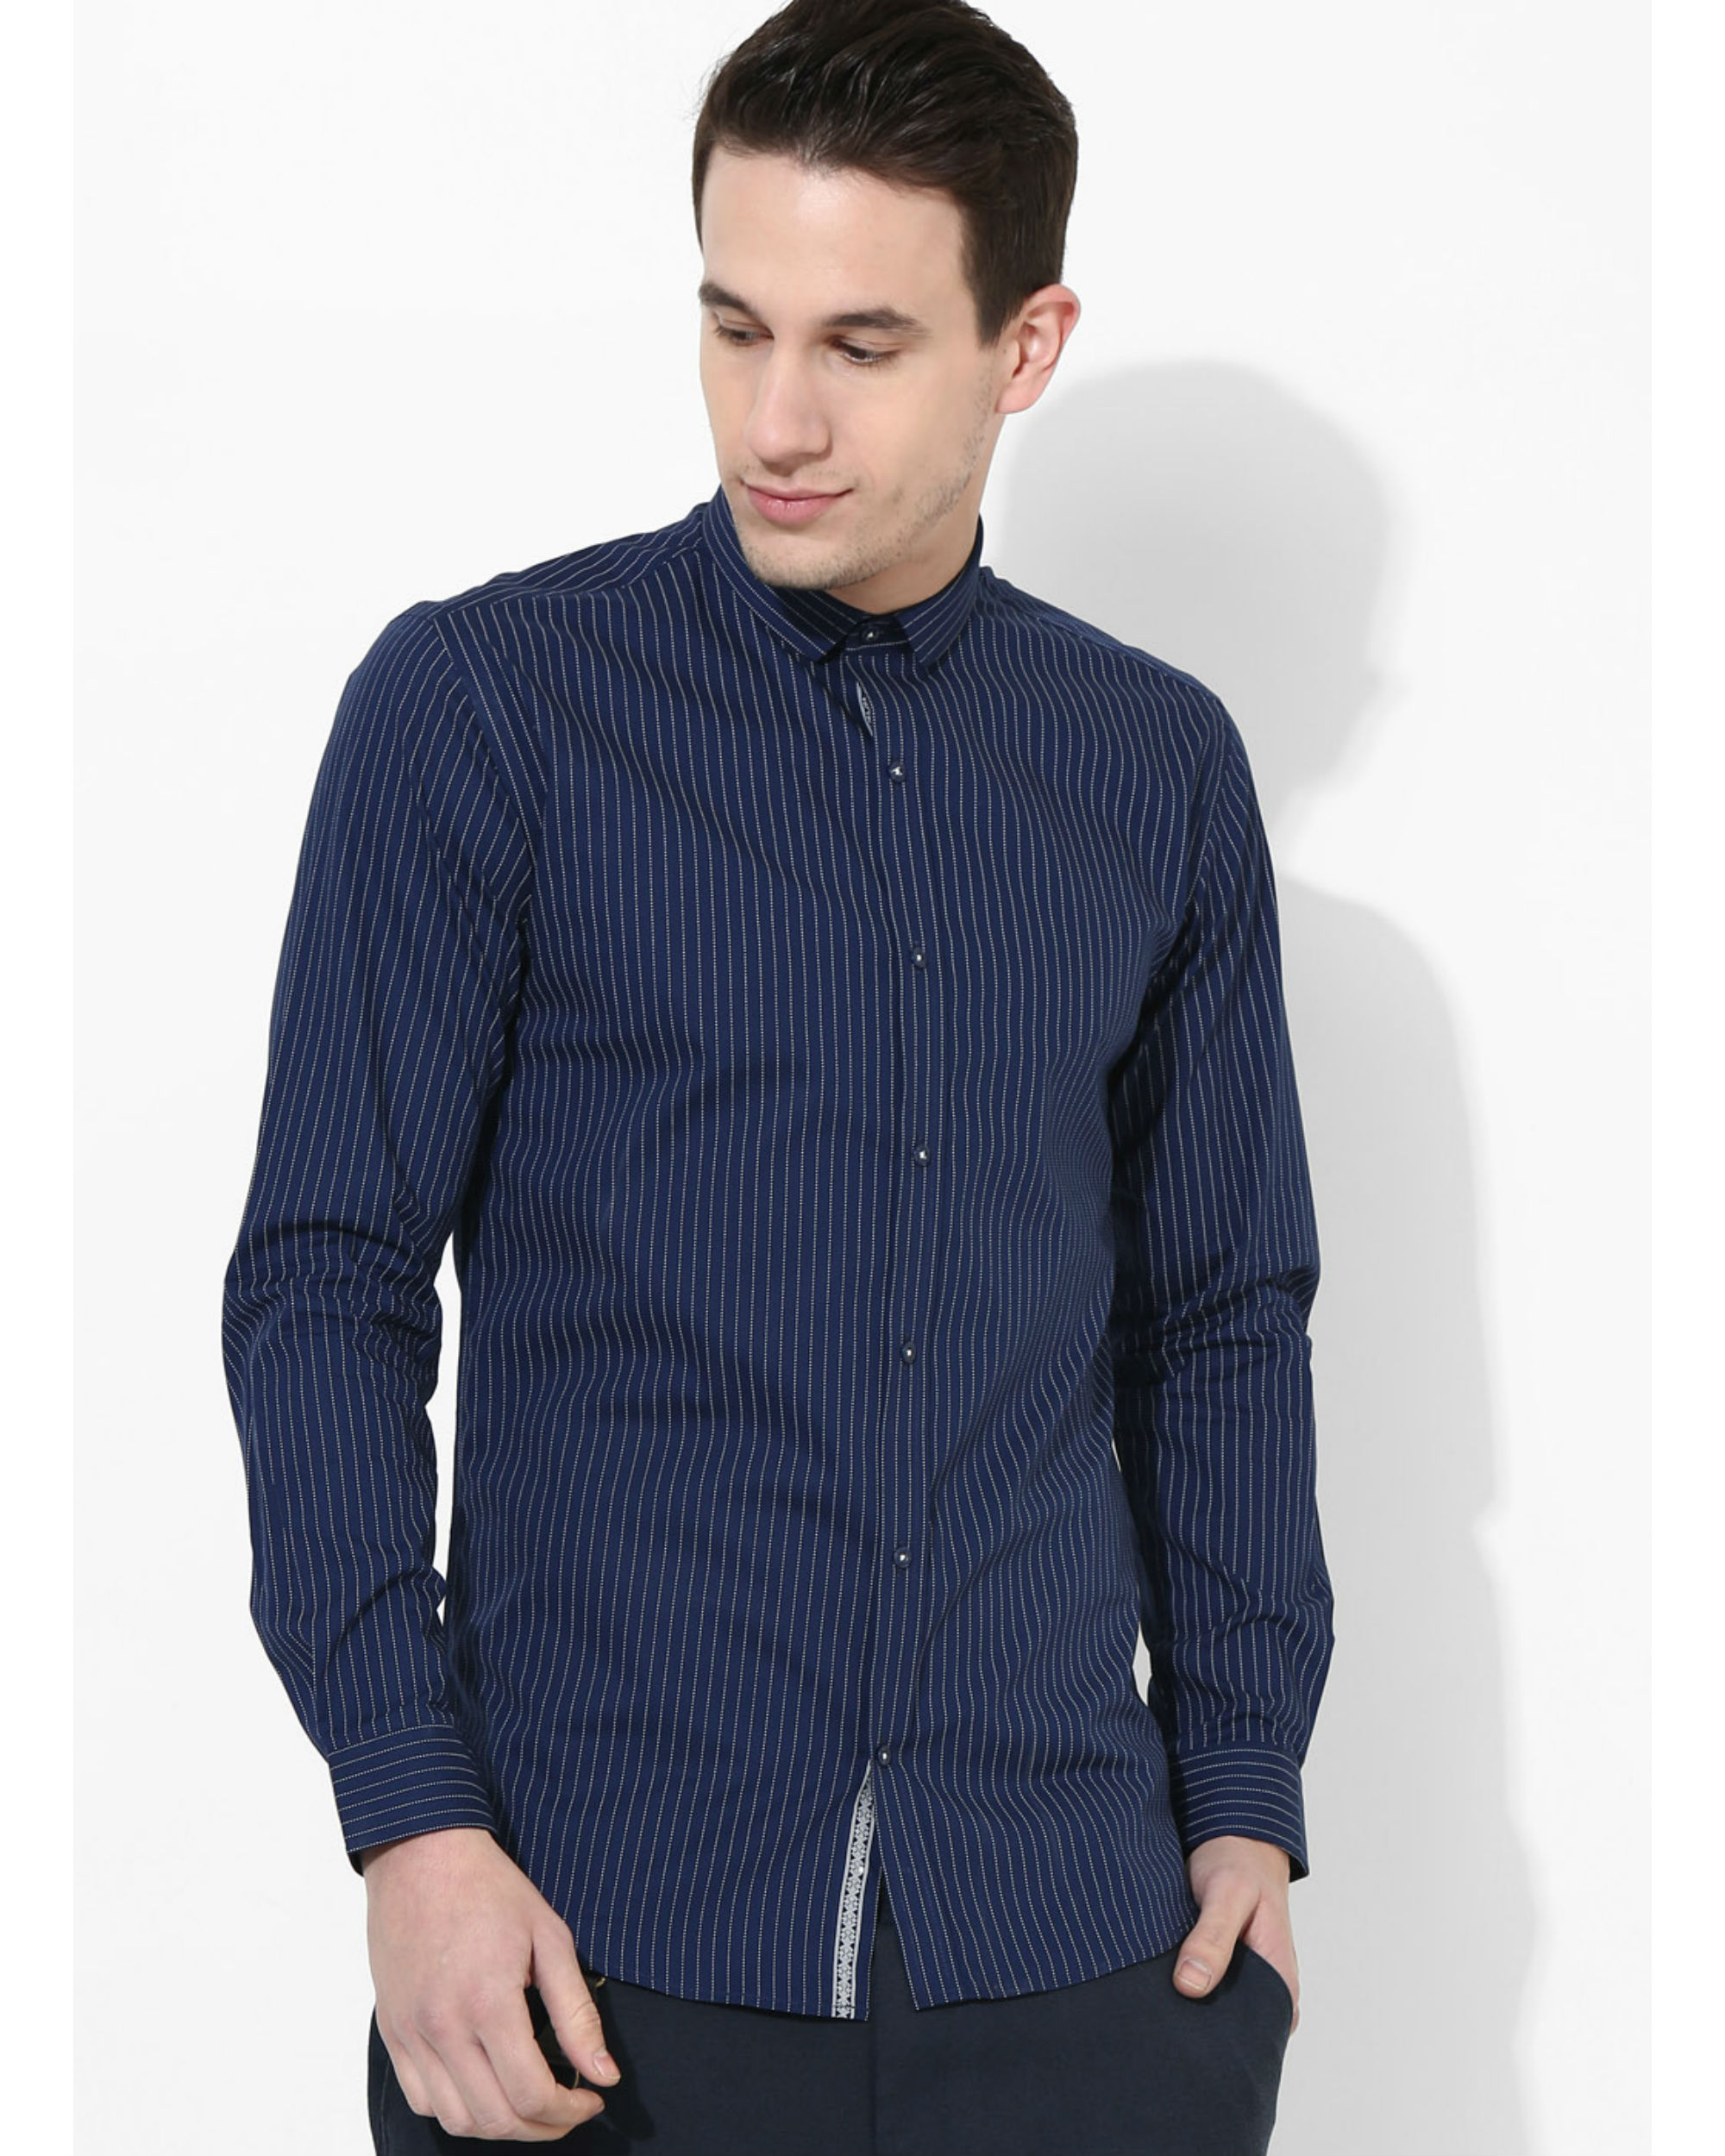 Navy blue striped shirt by Green Hill | The Secret Label